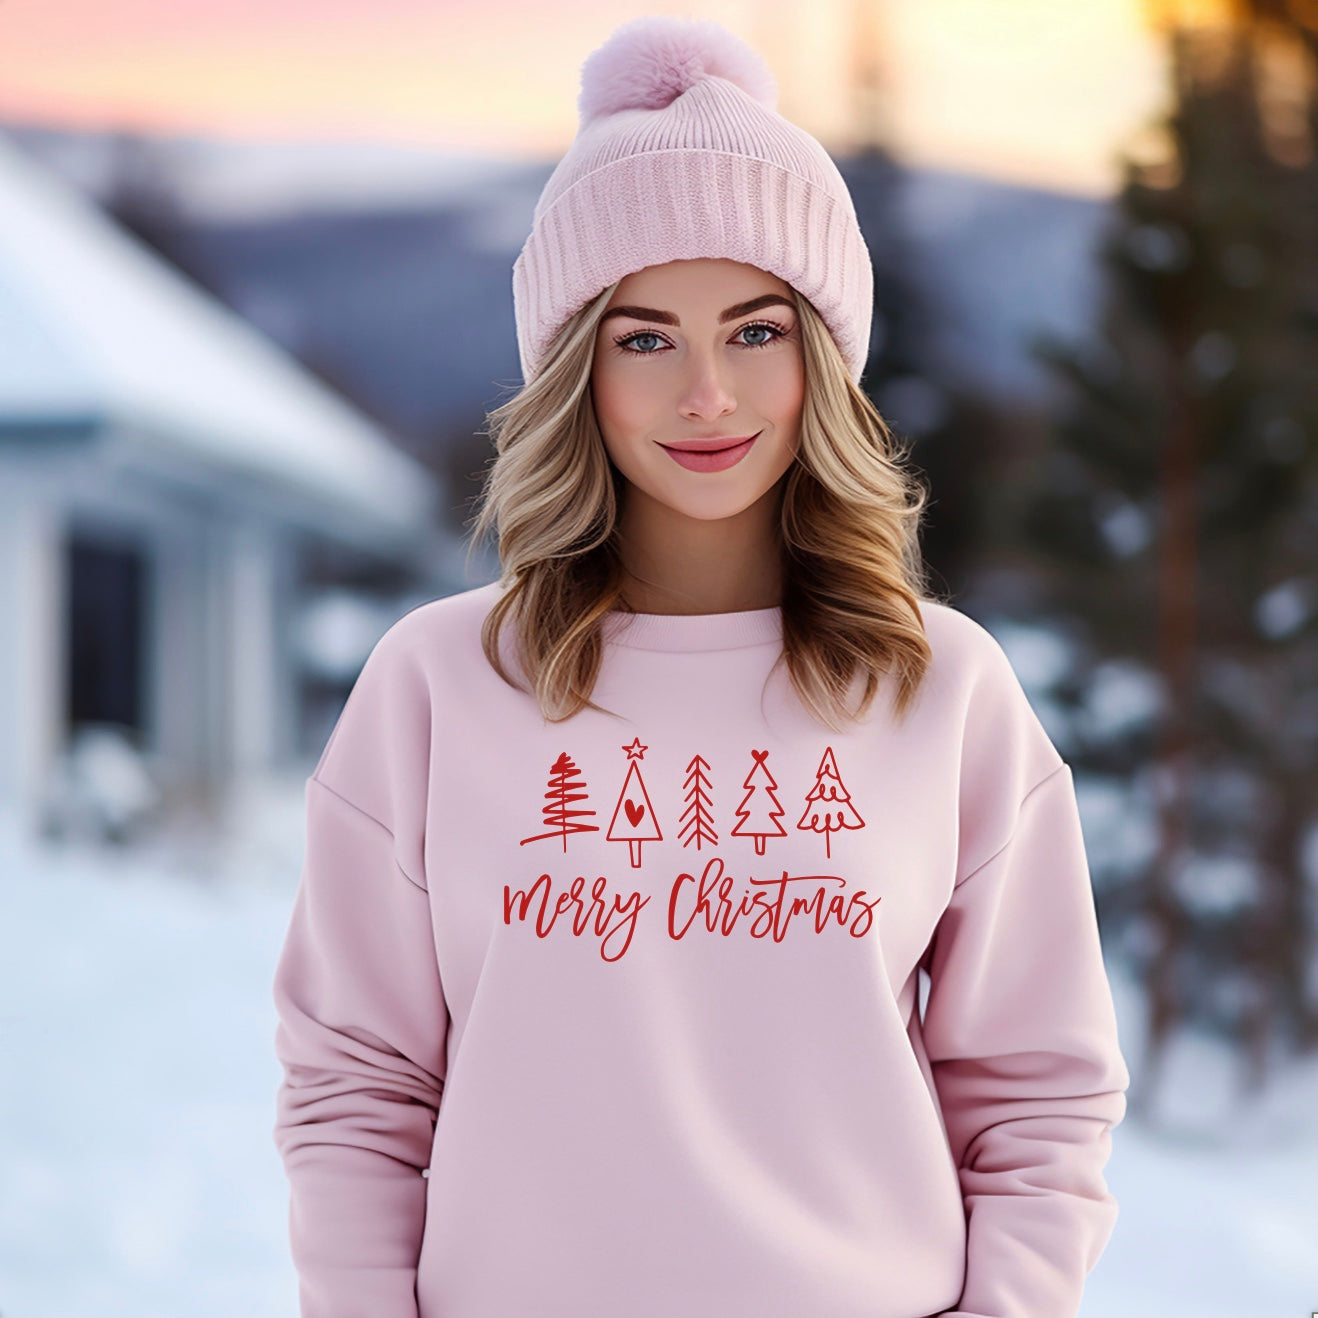 Merry Christmas crewneck sweatshirt with Christmas tree design for women in pink